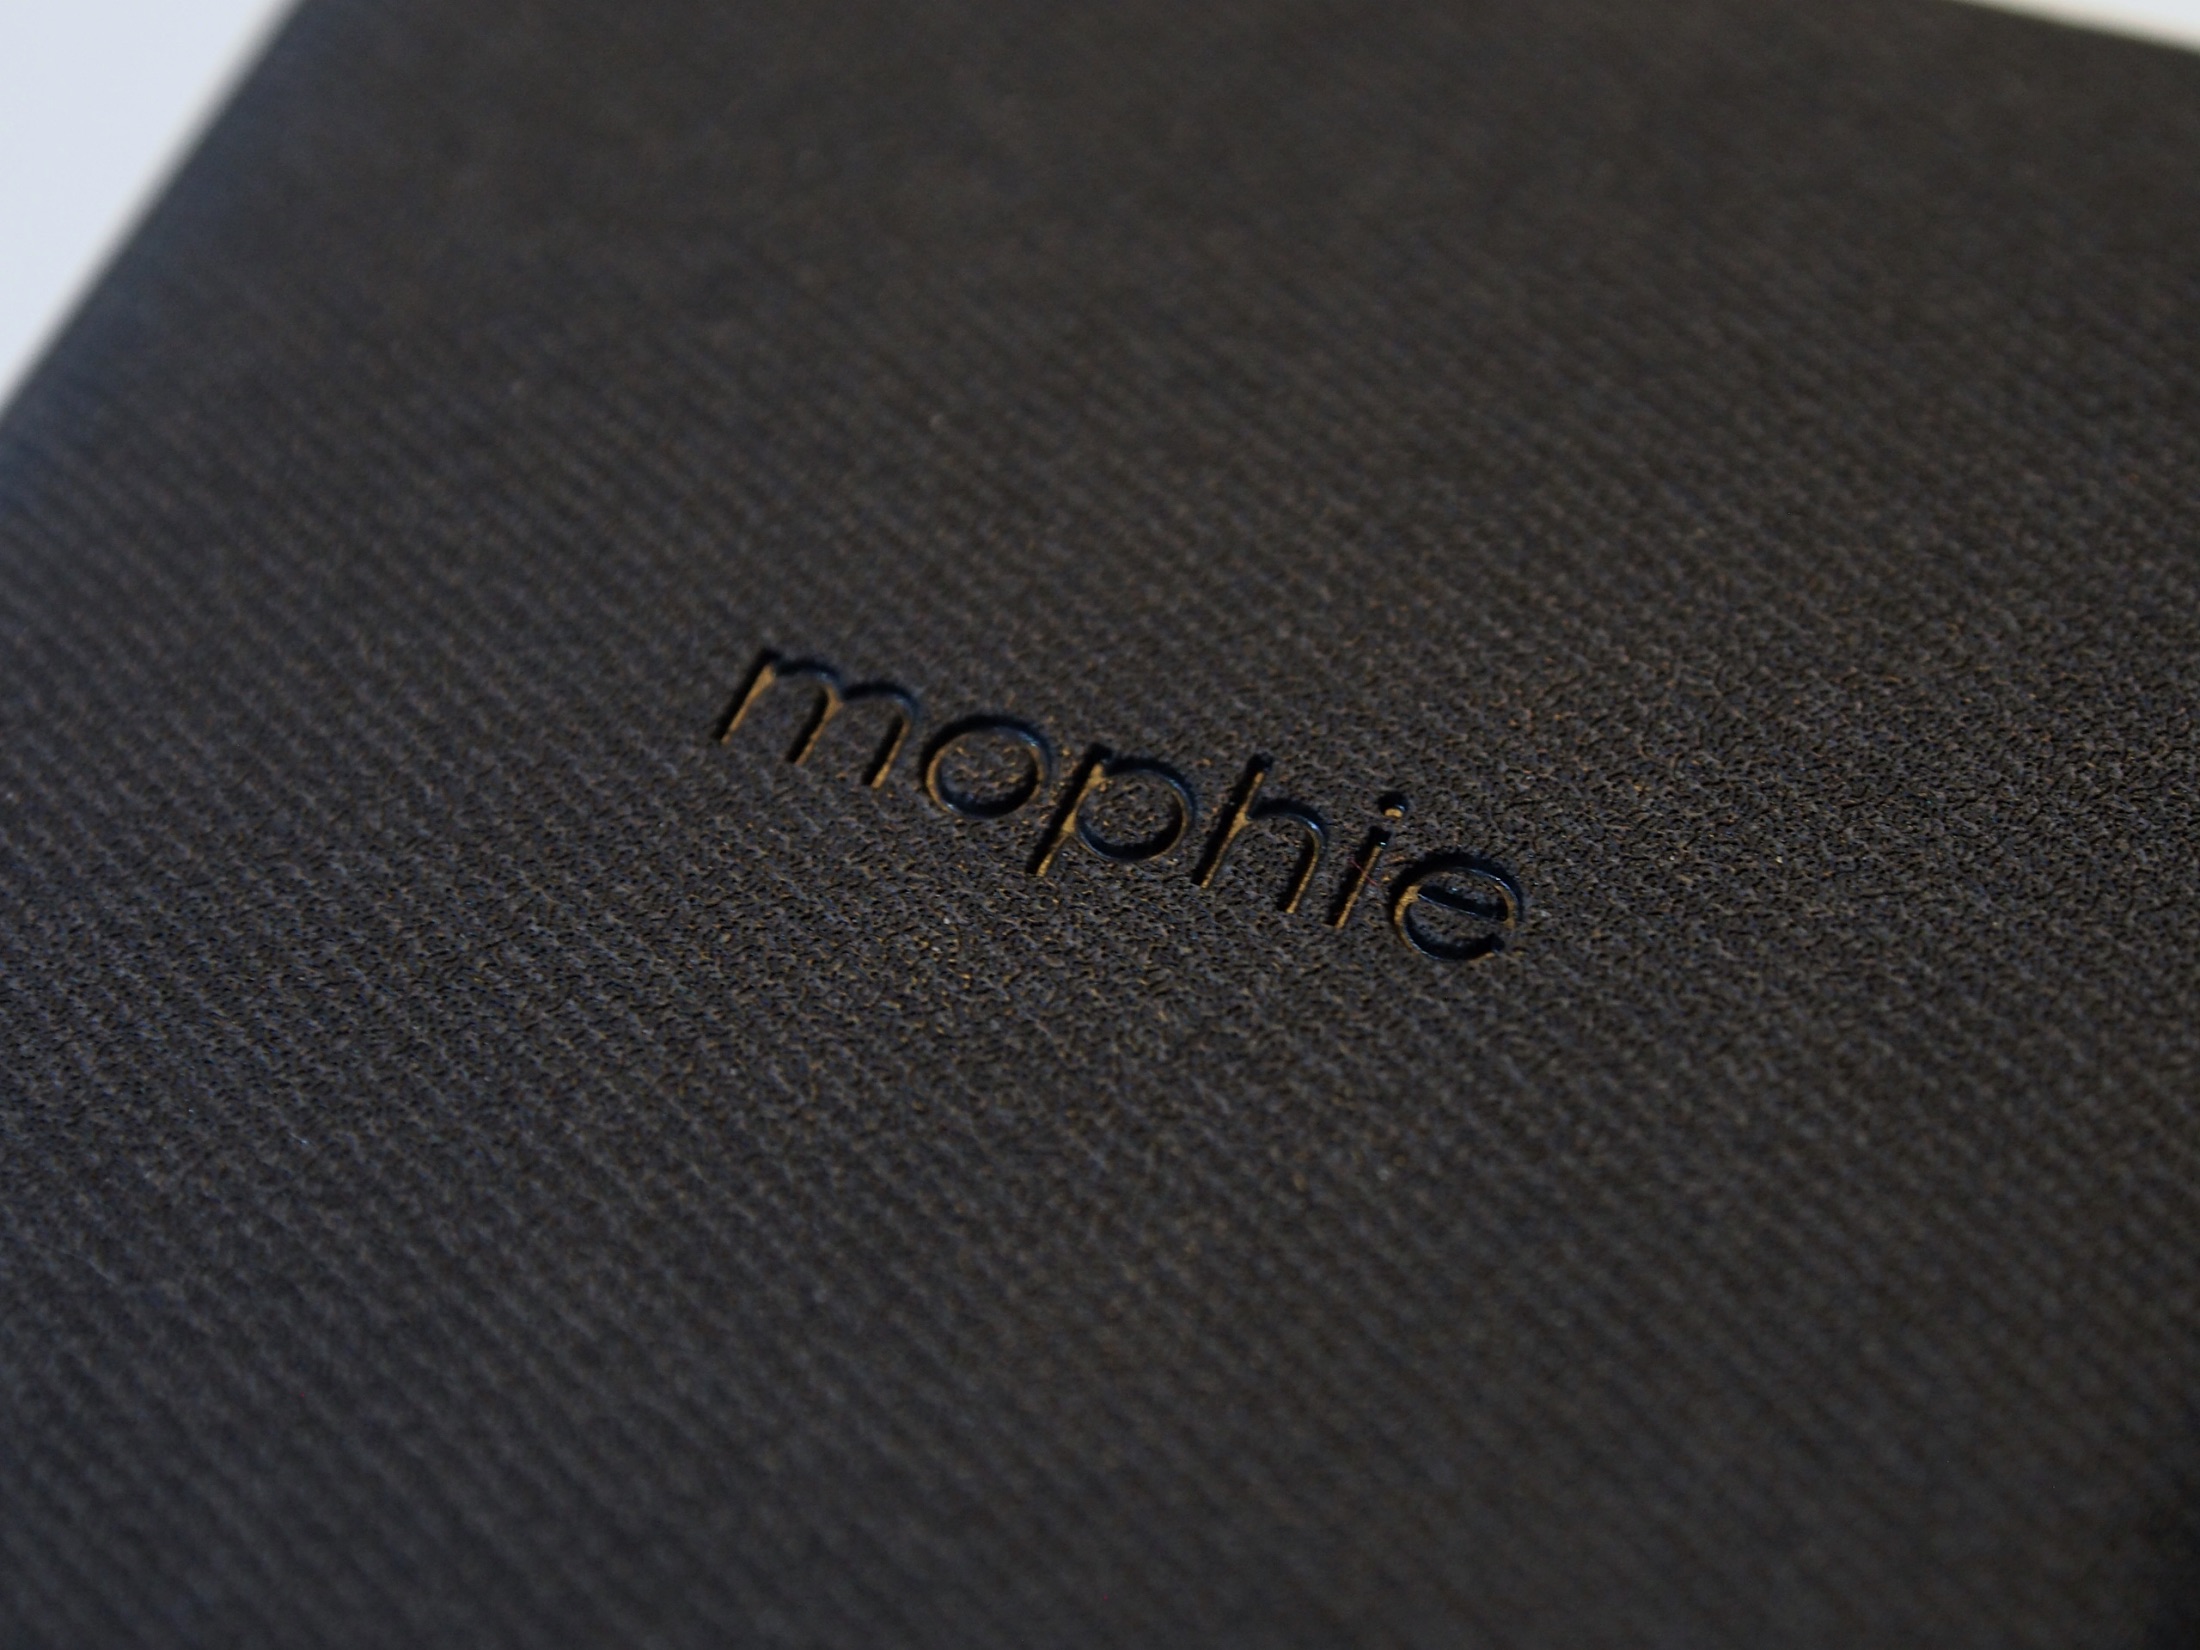 Mophie Power-Bank